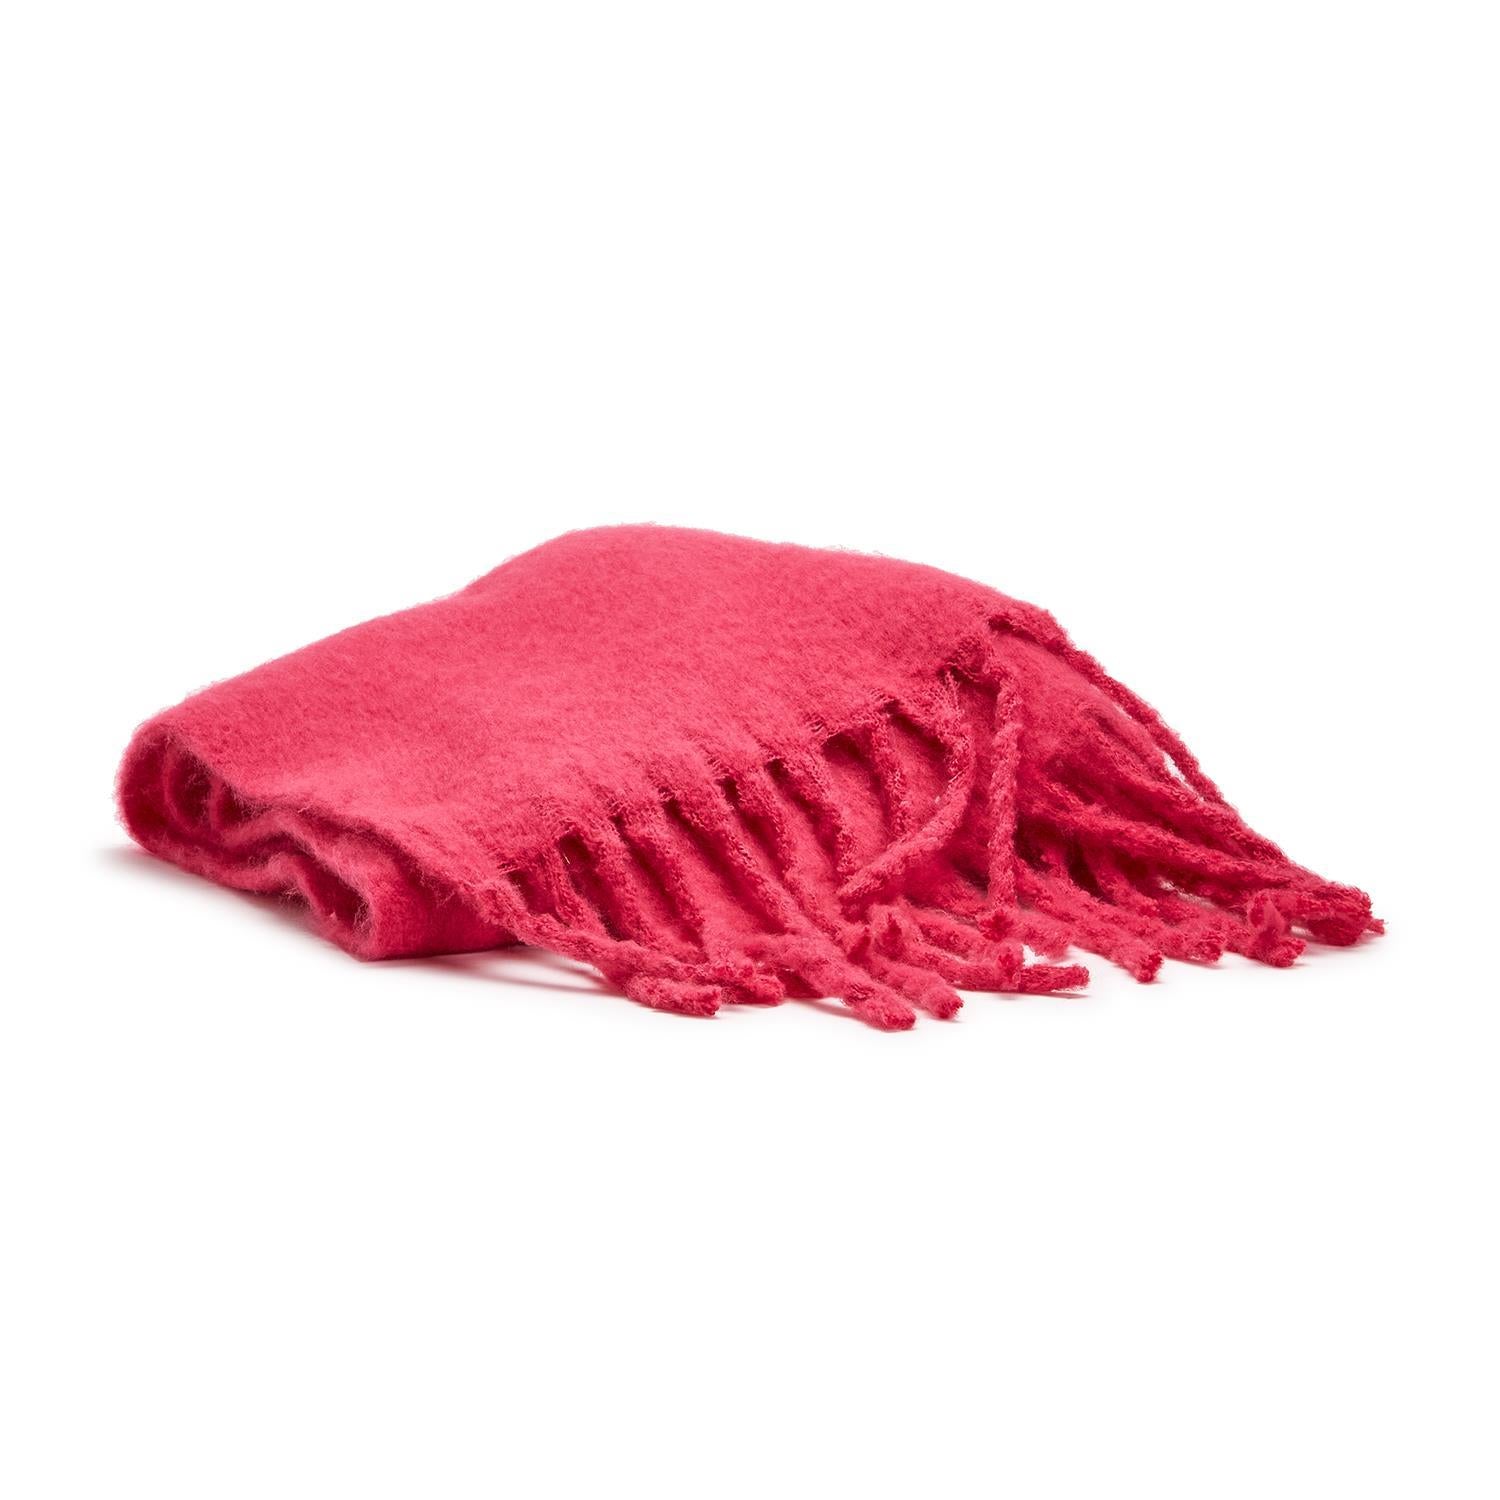 Gorgeous Throw Blanket in Super Soft Brushed Material